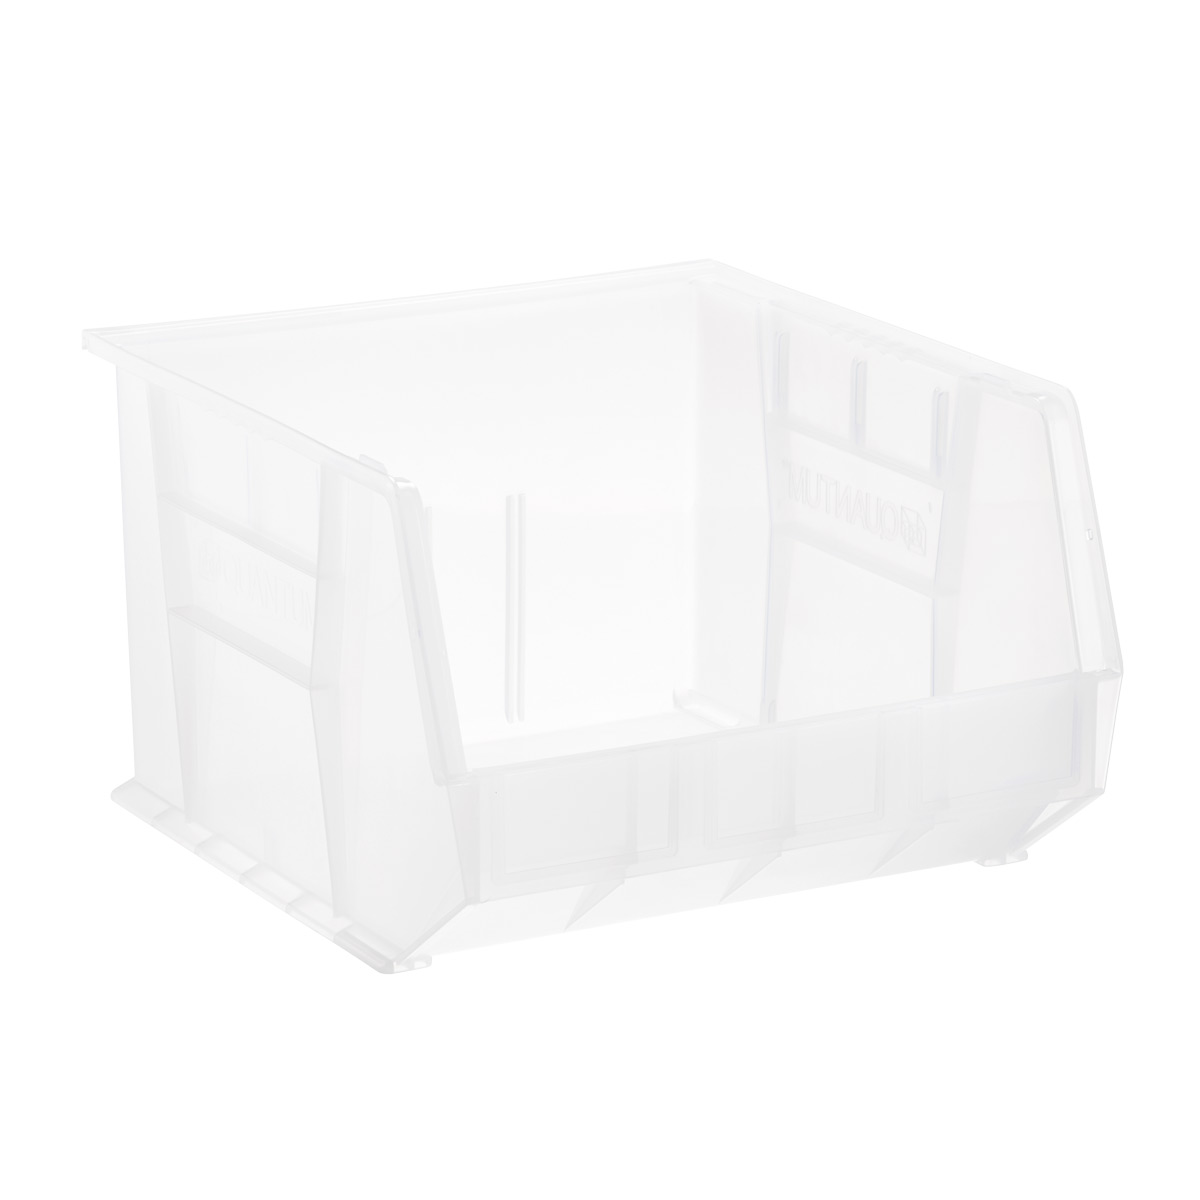 https://images.containerstore.com/catalogimages/370630/10079269-large-stackable-utility-bin.jpg